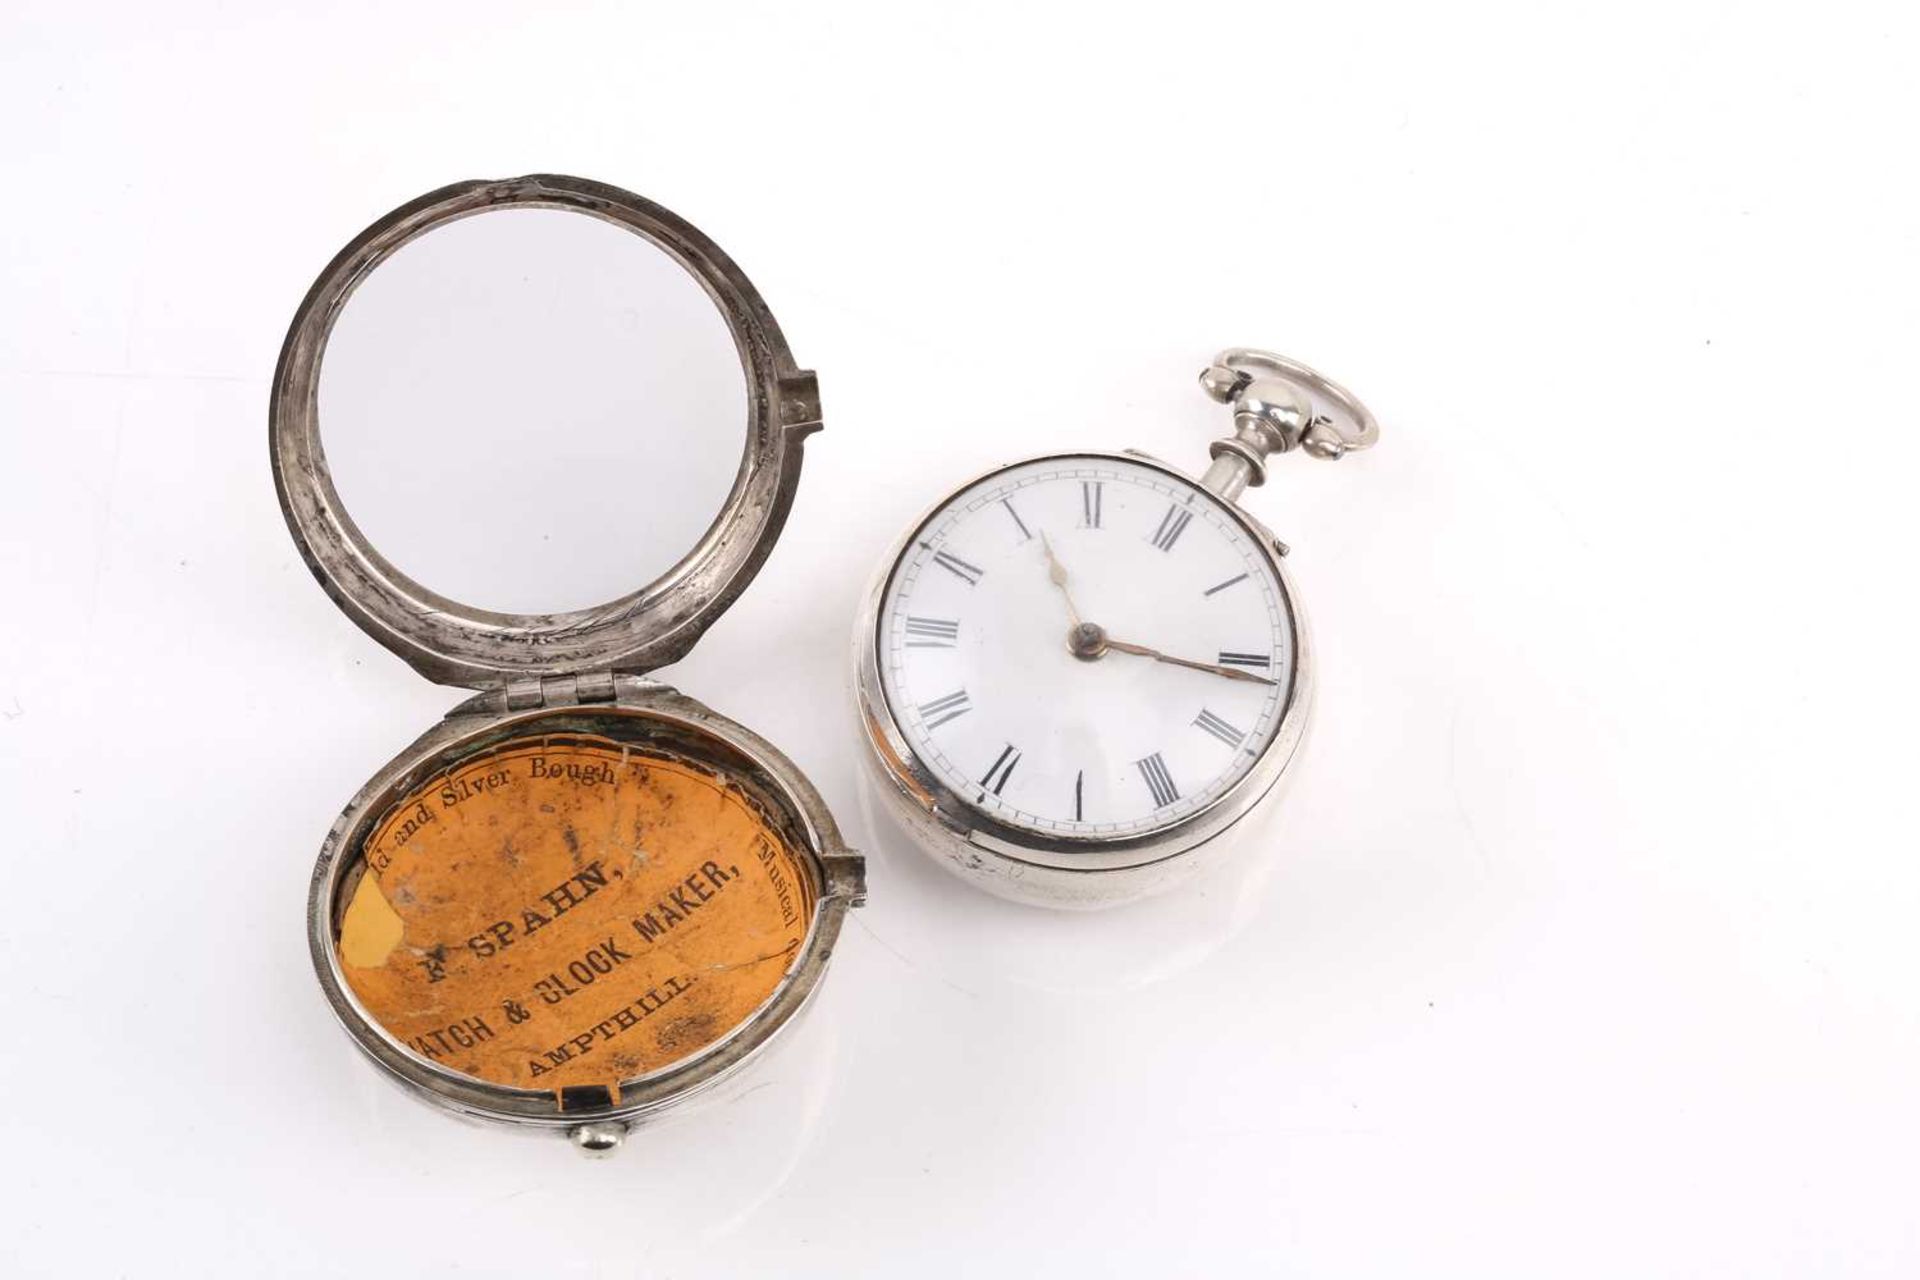 A Silver open-face pocket watch with a pair-case from 1757, featuring a key-wound fusee movement - Image 2 of 4